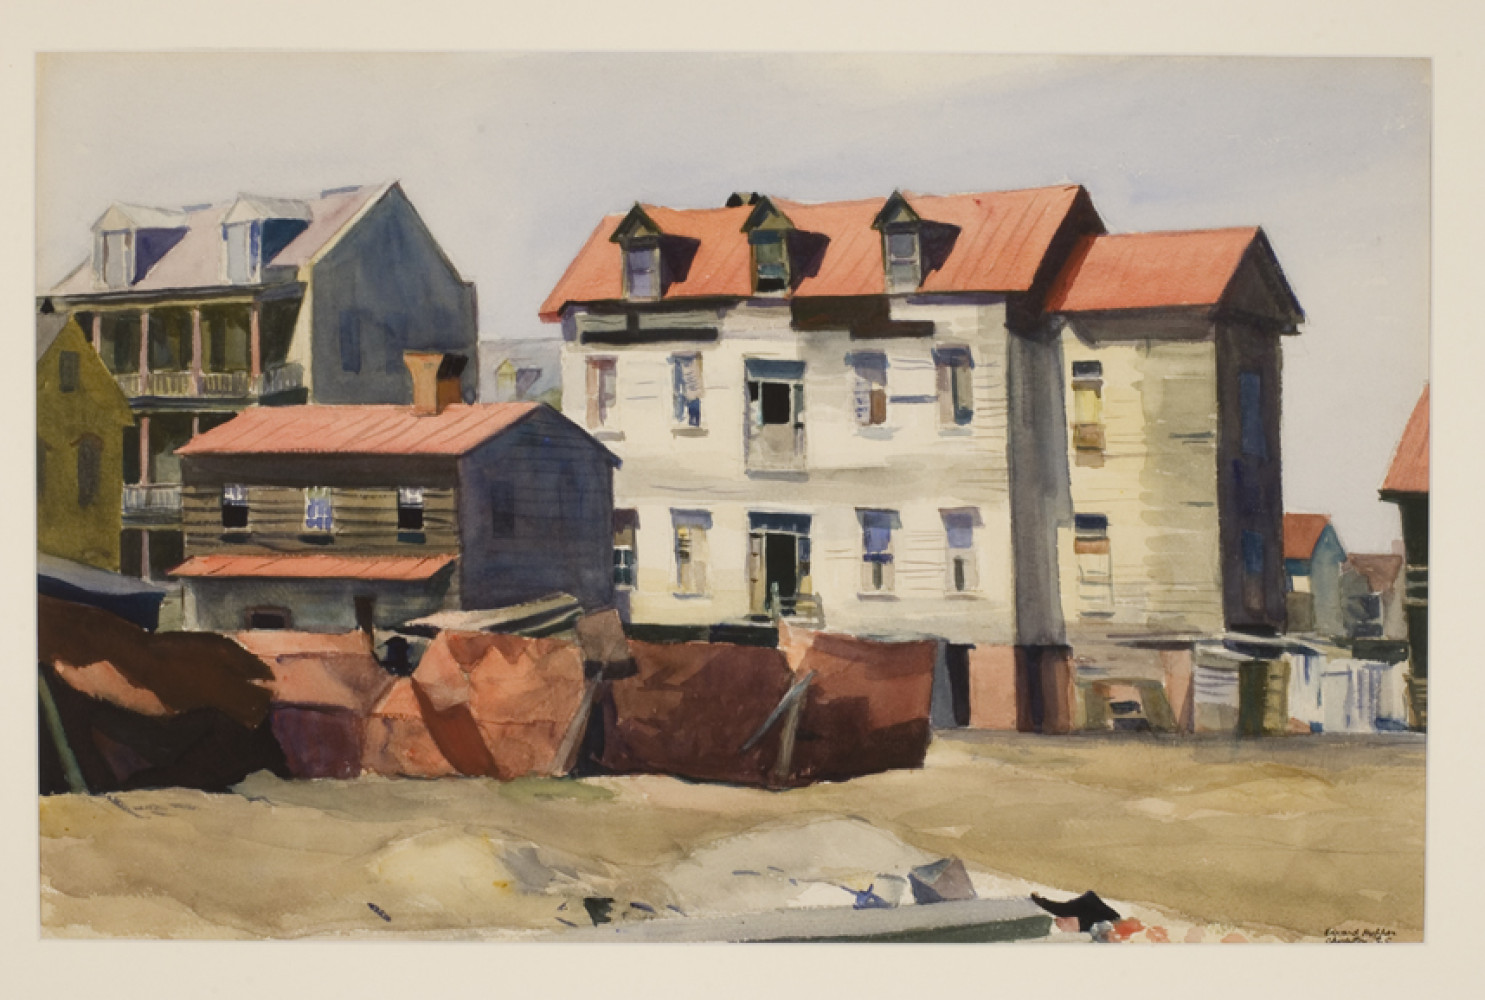 Charleston Slum, 1929, By Edward Hopper (American, 1882-1967), Watercolor on paper, 16 x 24 inches, Private collection
